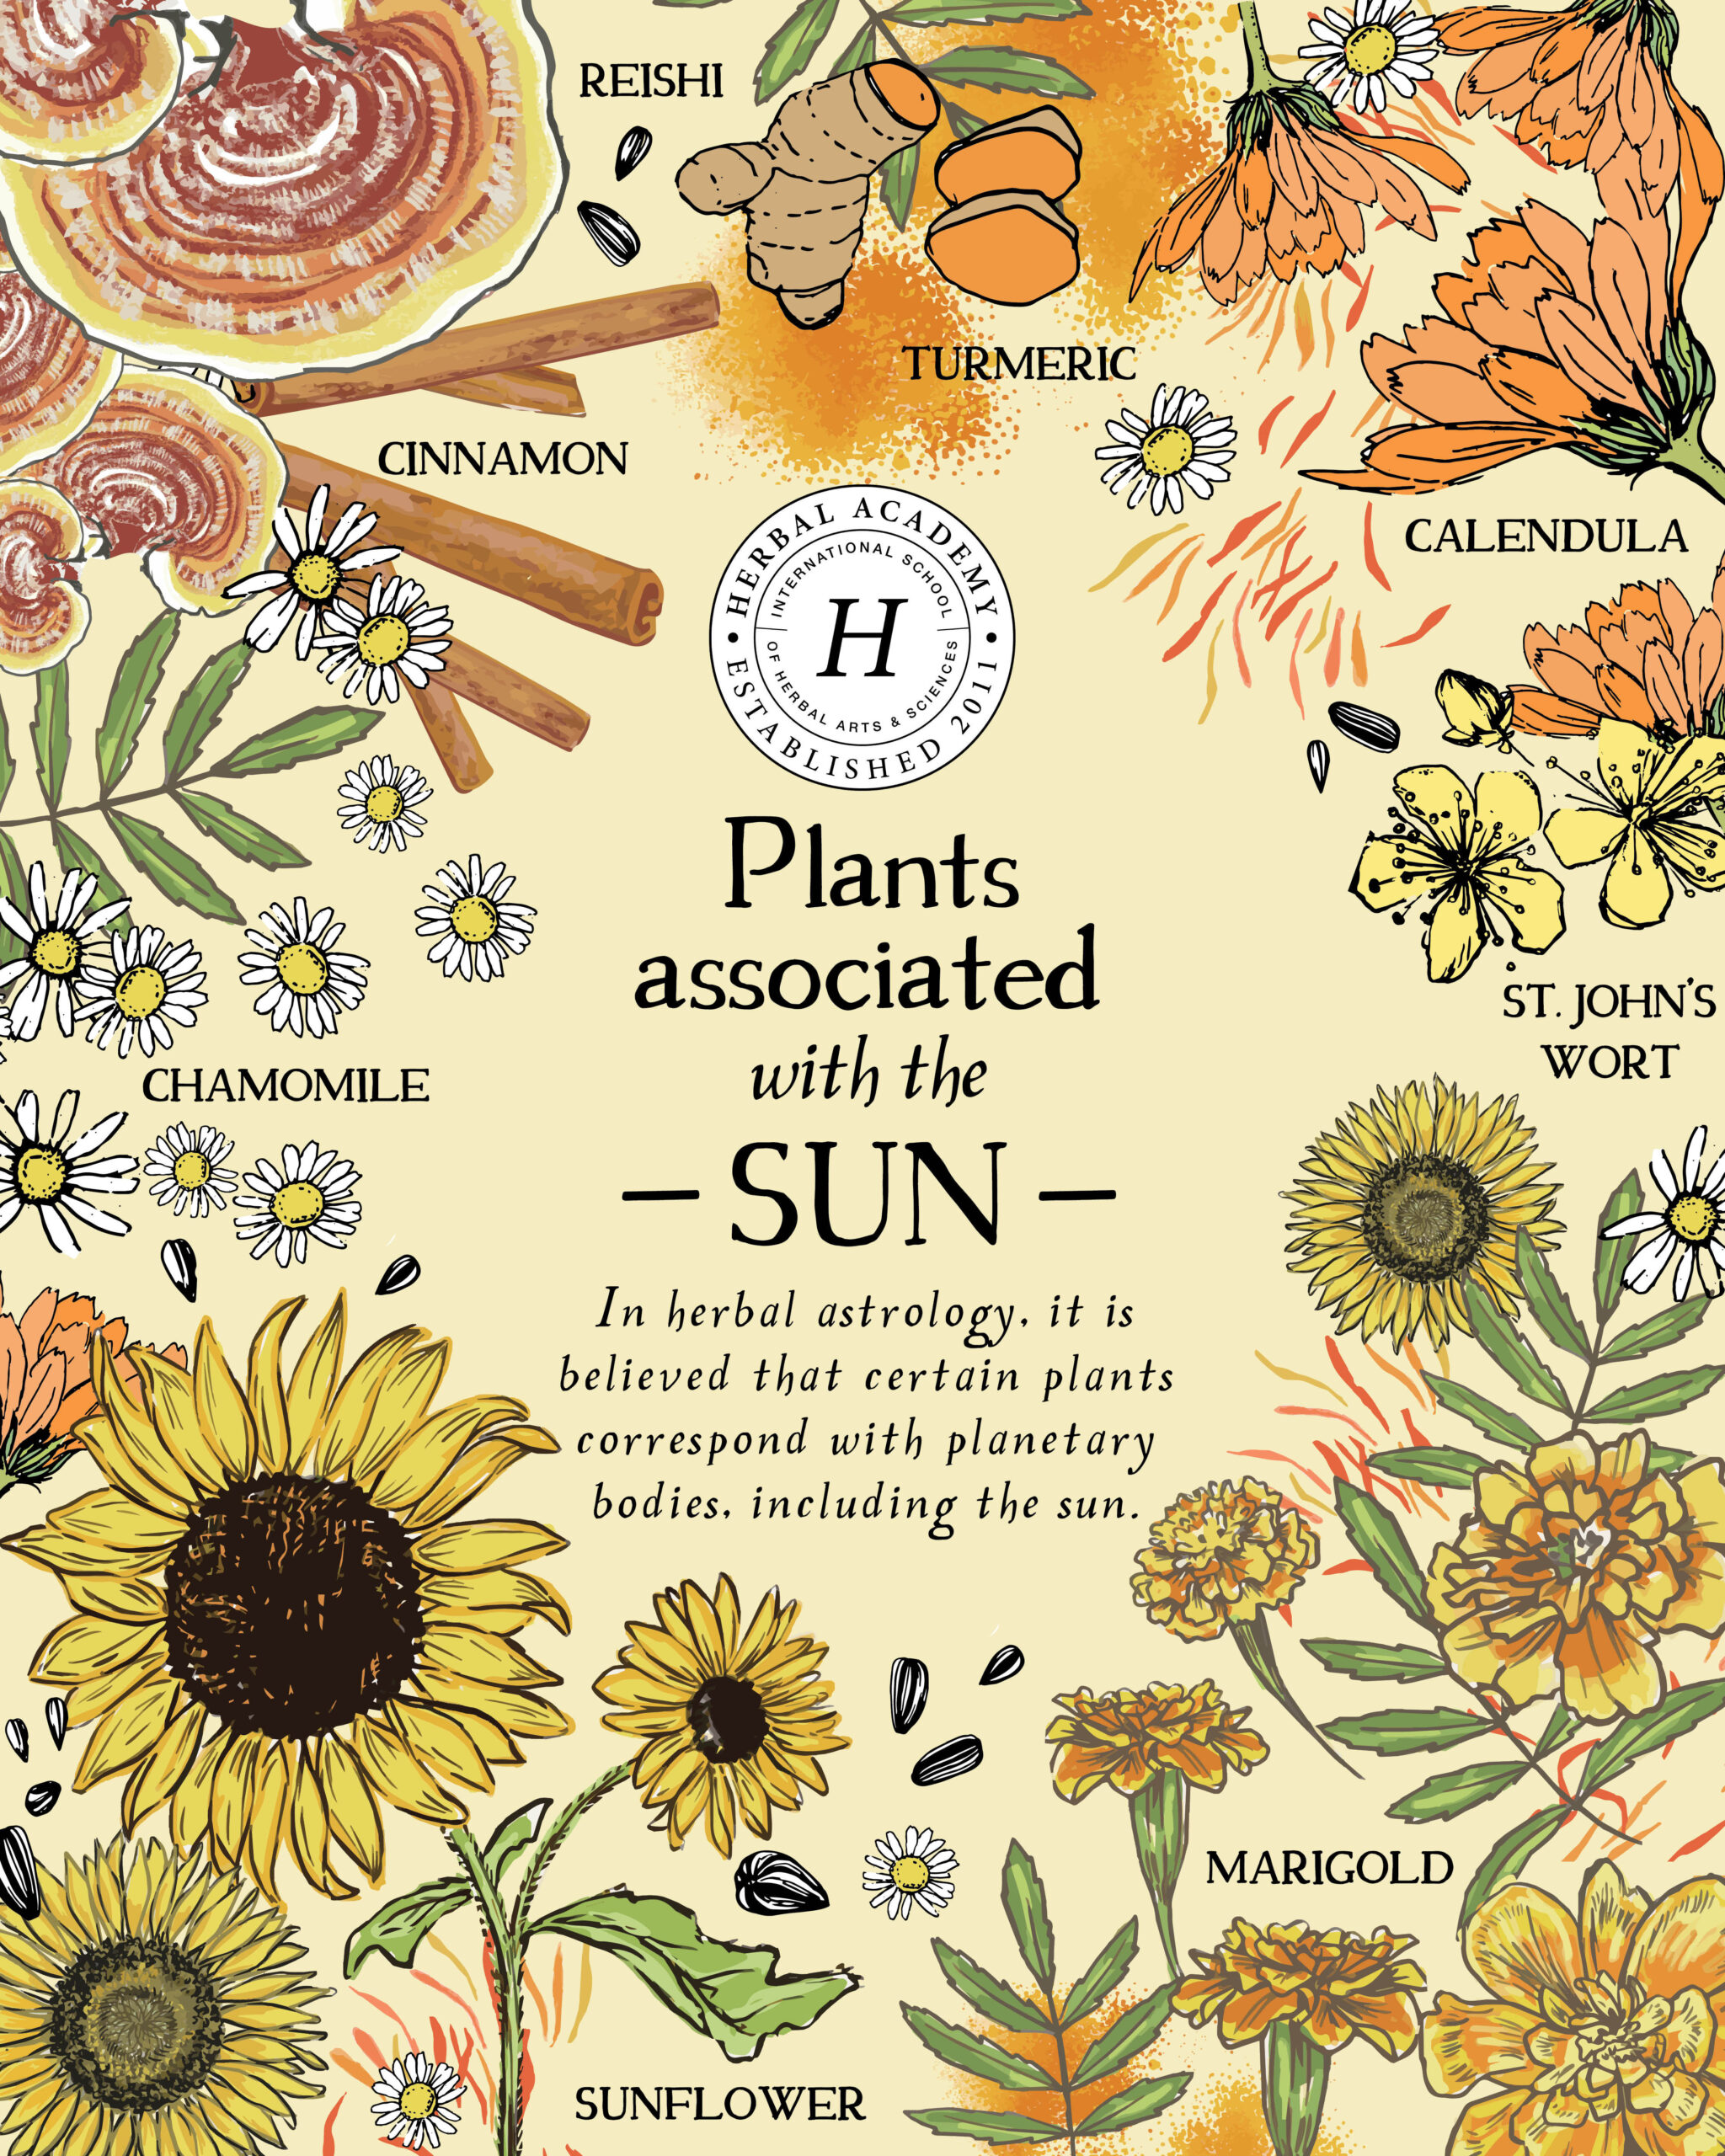 Let's Celebrate These 8 Plants That Are Associated With the Sun | Herbal Academy | Let's take a deeper look into these 8 plants associated with the Sun and how we can celebrate and enjoy the energizing connection.